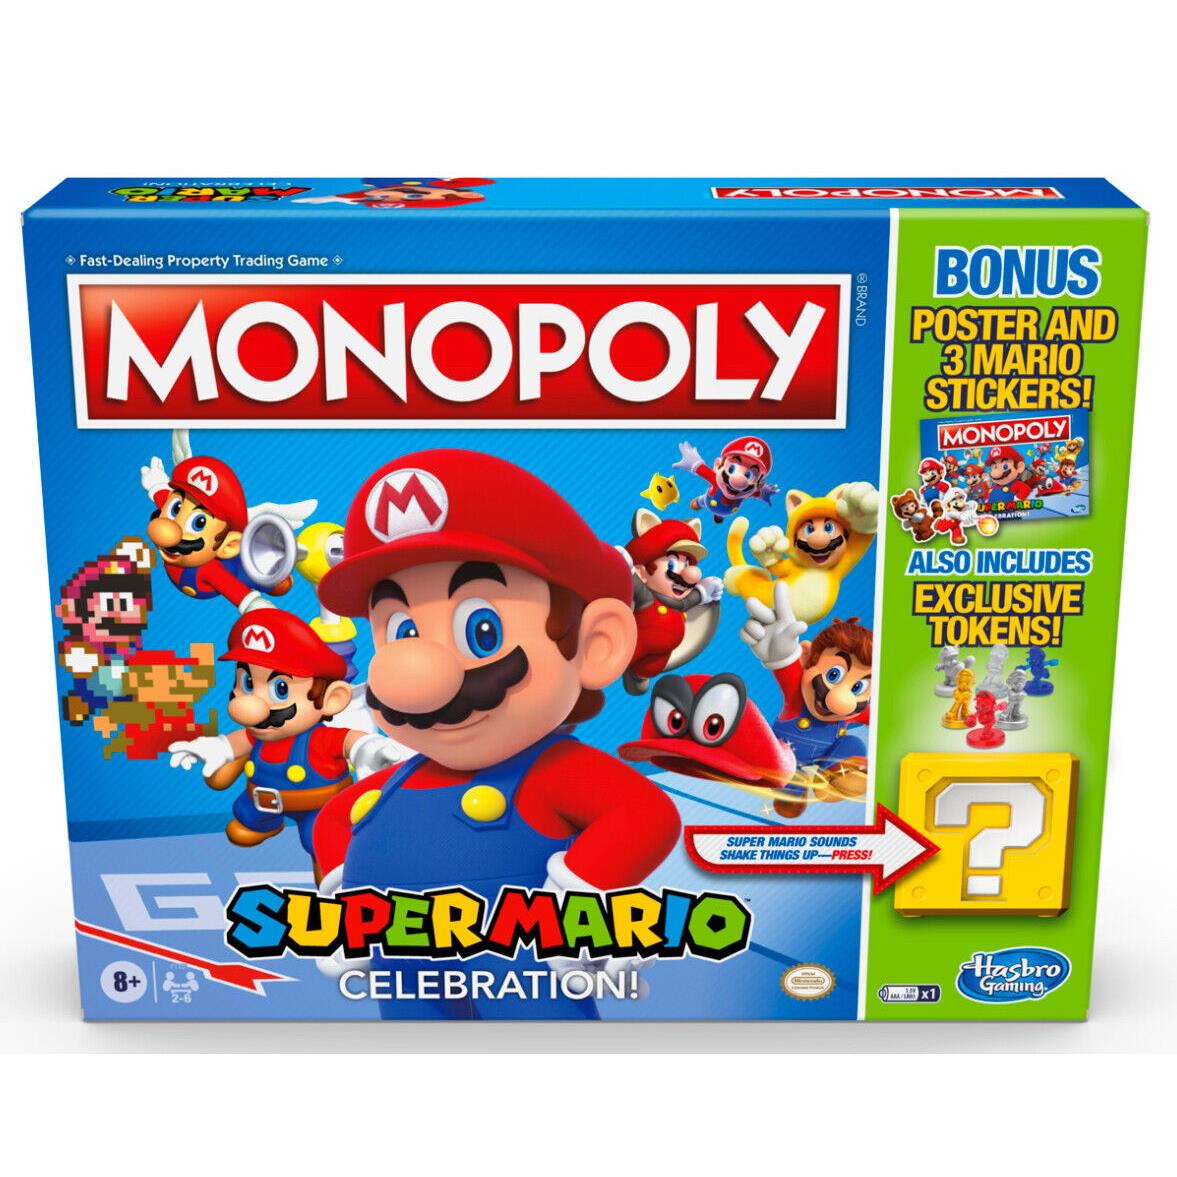 Super Mario Monopoly Celebration Edition Board Game with Poster and Stickers